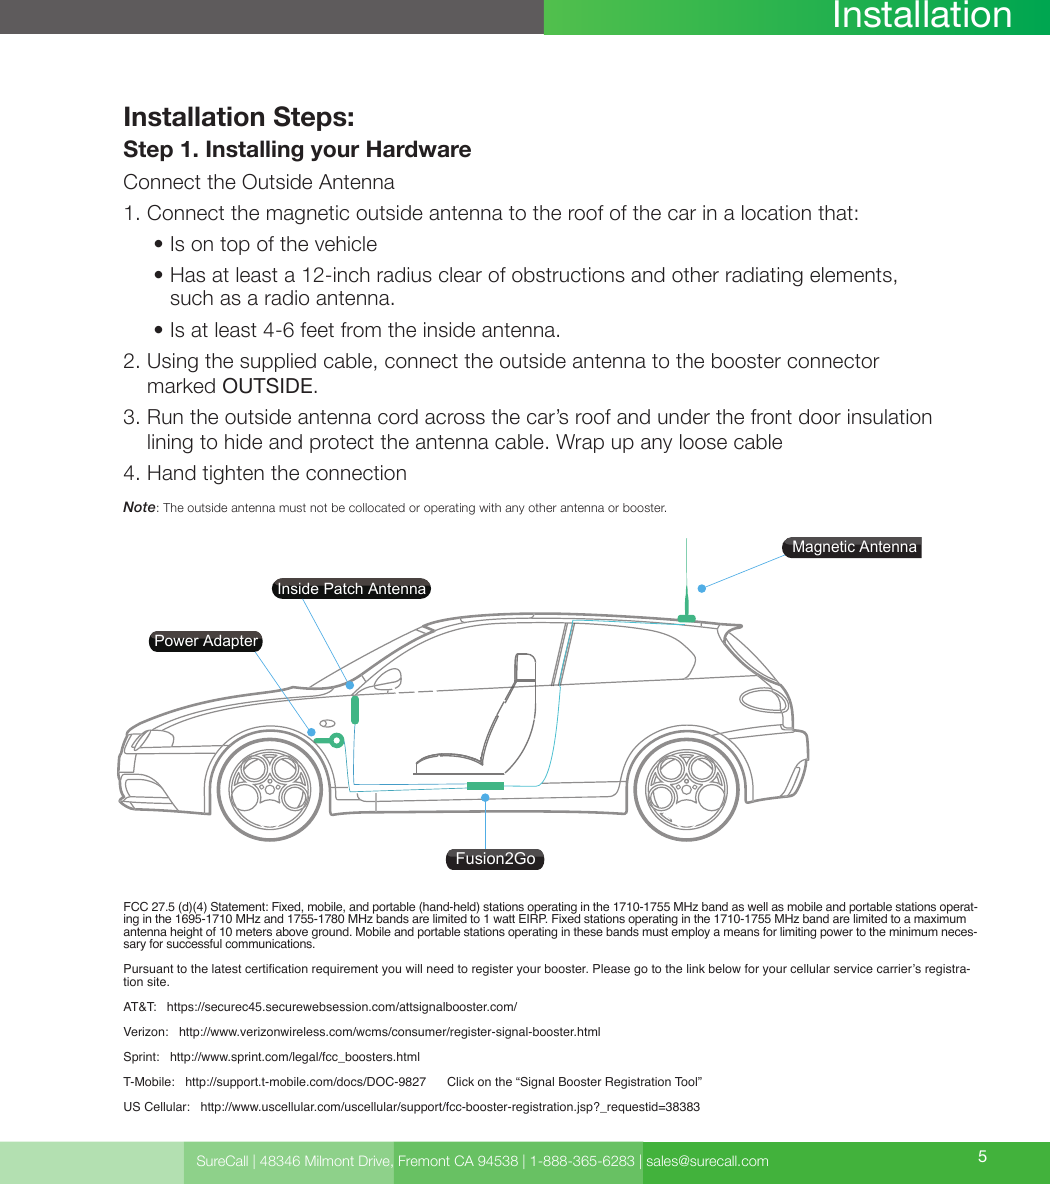 SureCall | 48346 Milmont Drive, Fremont CA 94538 | 1-888-365-6283 | sales@surecall.com 5InstallationInstallation Steps:Step 1. Installing your HardwareConnect the Outside Antenna1. Connect the magnetic outside antenna to the roof of the car in a location that:     • Is on top of the vehicle     •  Has at least a 12-inch radius clear of obstructions and other radiating elements, such as a radio antenna.     • Is at least 4-6 feet from the inside antenna.2.  Using the supplied cable, connect the outside antenna to the booster connector marked OUTSIDE.3.  Run the outside antenna cord across the car’s roof and under the front door insulation lining to hide and protect the antenna cable. Wrap up any loose cable4. Hand tighten the connectionNote:  The outside antenna must not be collocated or operating with any other antenna or booster.FCC 27.5 (d)(4) Statement: Fixed, mobile, and portable (hand-held) stations operating in the 1710-1755 MHz band as well as mobile and portable stations operat-ing in the 1695-1710 MHz and 1755-1780 MHz bands are limited to 1 watt EIRP. Fixed stations operating in the 1710-1755 MHz band are limited to a maximum antenna height of 10 meters above ground. Mobile and portable stations operating in these bands must employ a means for limiting power to the minimum neces-sary for successful communications.Pursuant to the latest certication requirement you will need to register your booster. Please go to the link below for your cellular service carrier’s registra-tion site. AT&amp;T:   https://securec45.securewebsession.com/attsignalbooster.com/   Verizon:   http://www.verizonwireless.com/wcms/consumer/register-signal-booster.html  Sprint:   http://www.sprint.com/legal/fcc_boosters.html  T-Mobile:   http://support.t-mobile.com/docs/DOC-9827      Click on the “Signal Booster Registration Tool” US Cellular:   http://www.uscellular.com/uscellular/support/fcc-booster-registration.jsp?_requestid=38383    Fusion2GoMagnetic AntennaPower AdapterInside Patch Antenna